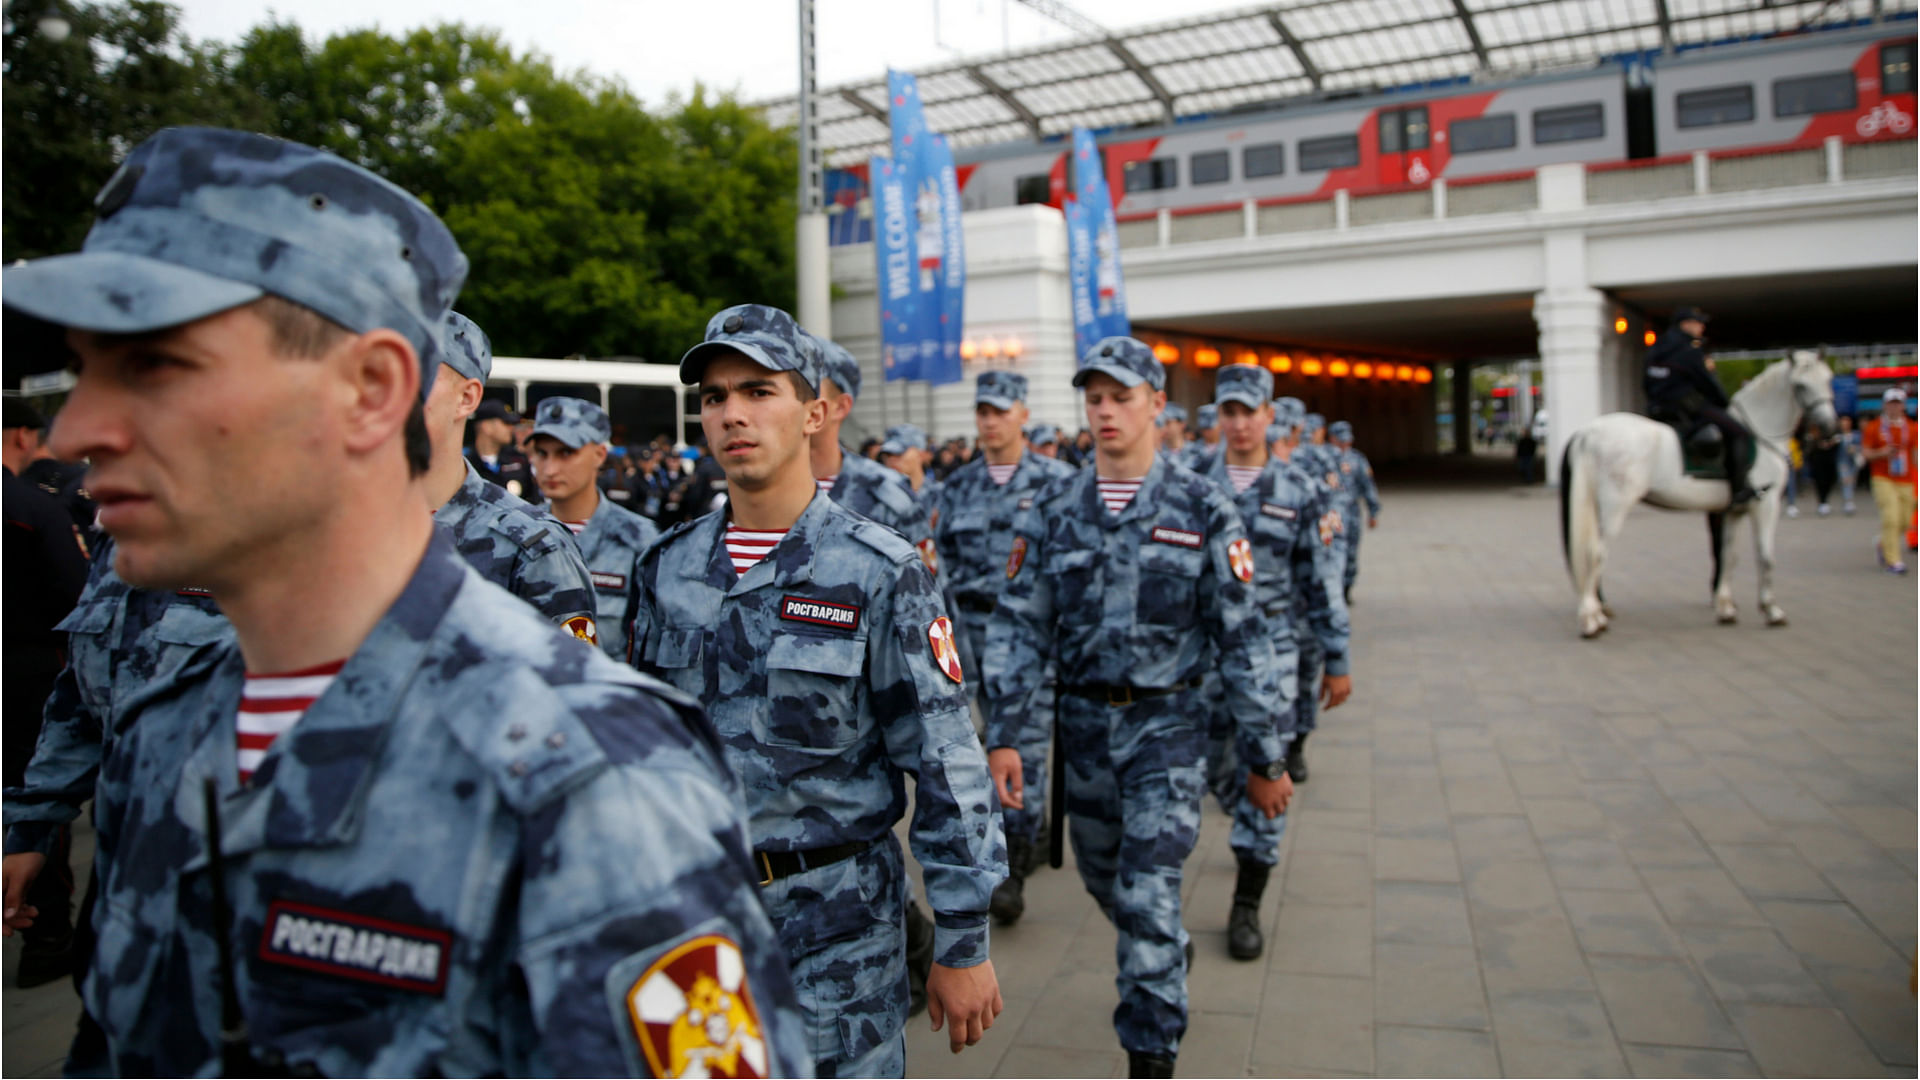 Russian soldiers are out in full force near World Cup venues, here securing Luzhniki stadium before the opener